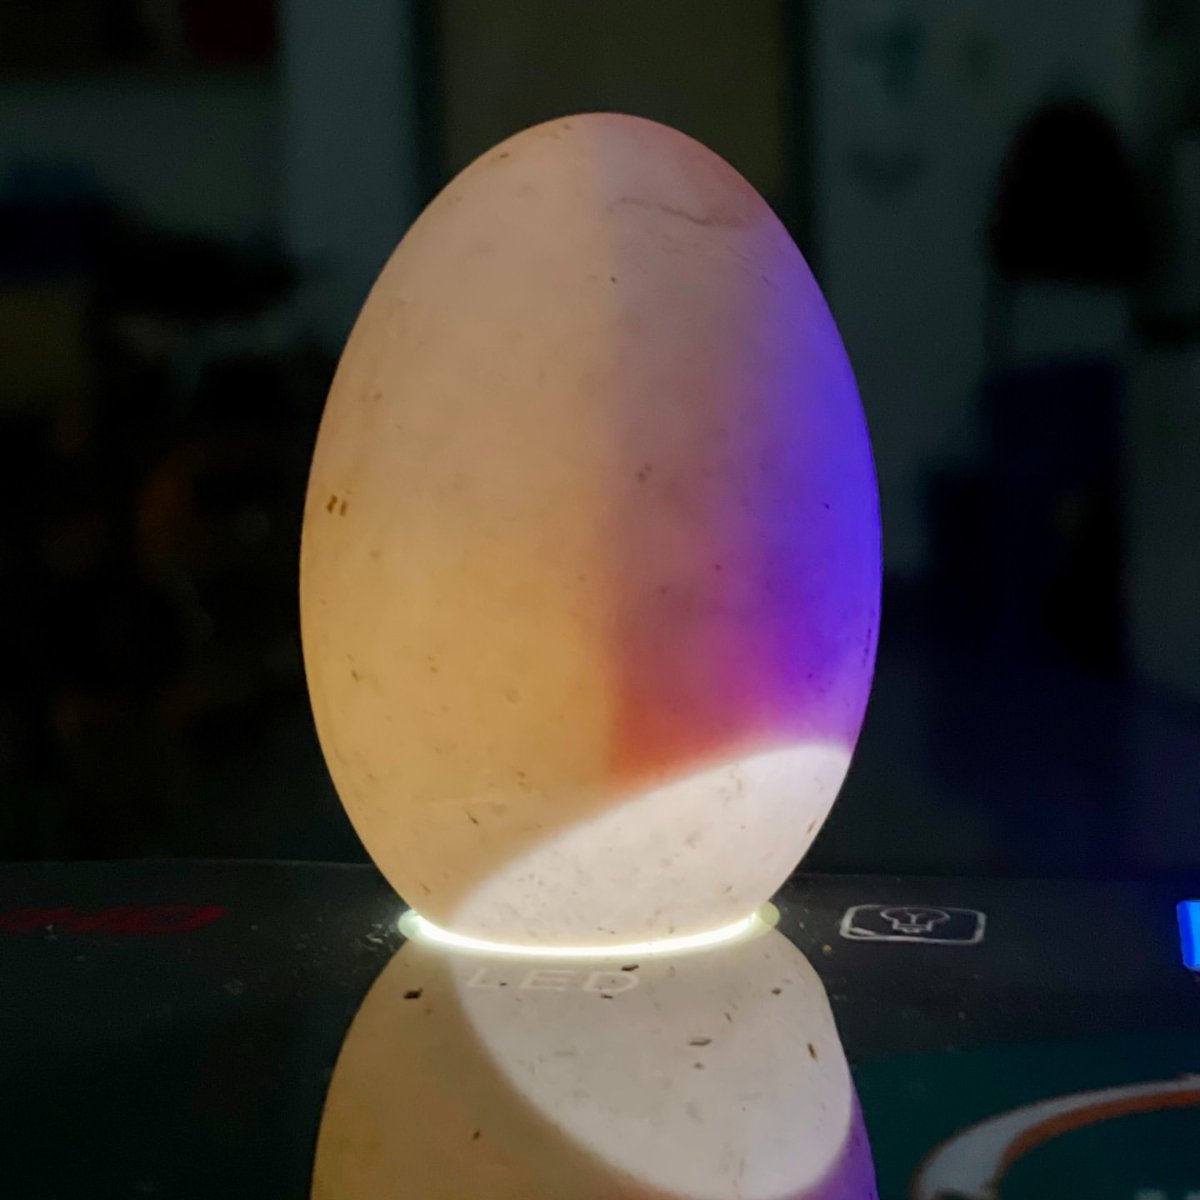 Two lucky ducklings have joined Grade 3 at Major General Griesbach School! 🦆🦆 While waiting eagerly for the duck eggs to hatch, students observed the embryos' real-time growth through regular candling sessions. Such an egg-citing, hands-on learning adventure! #EPSB #yeg